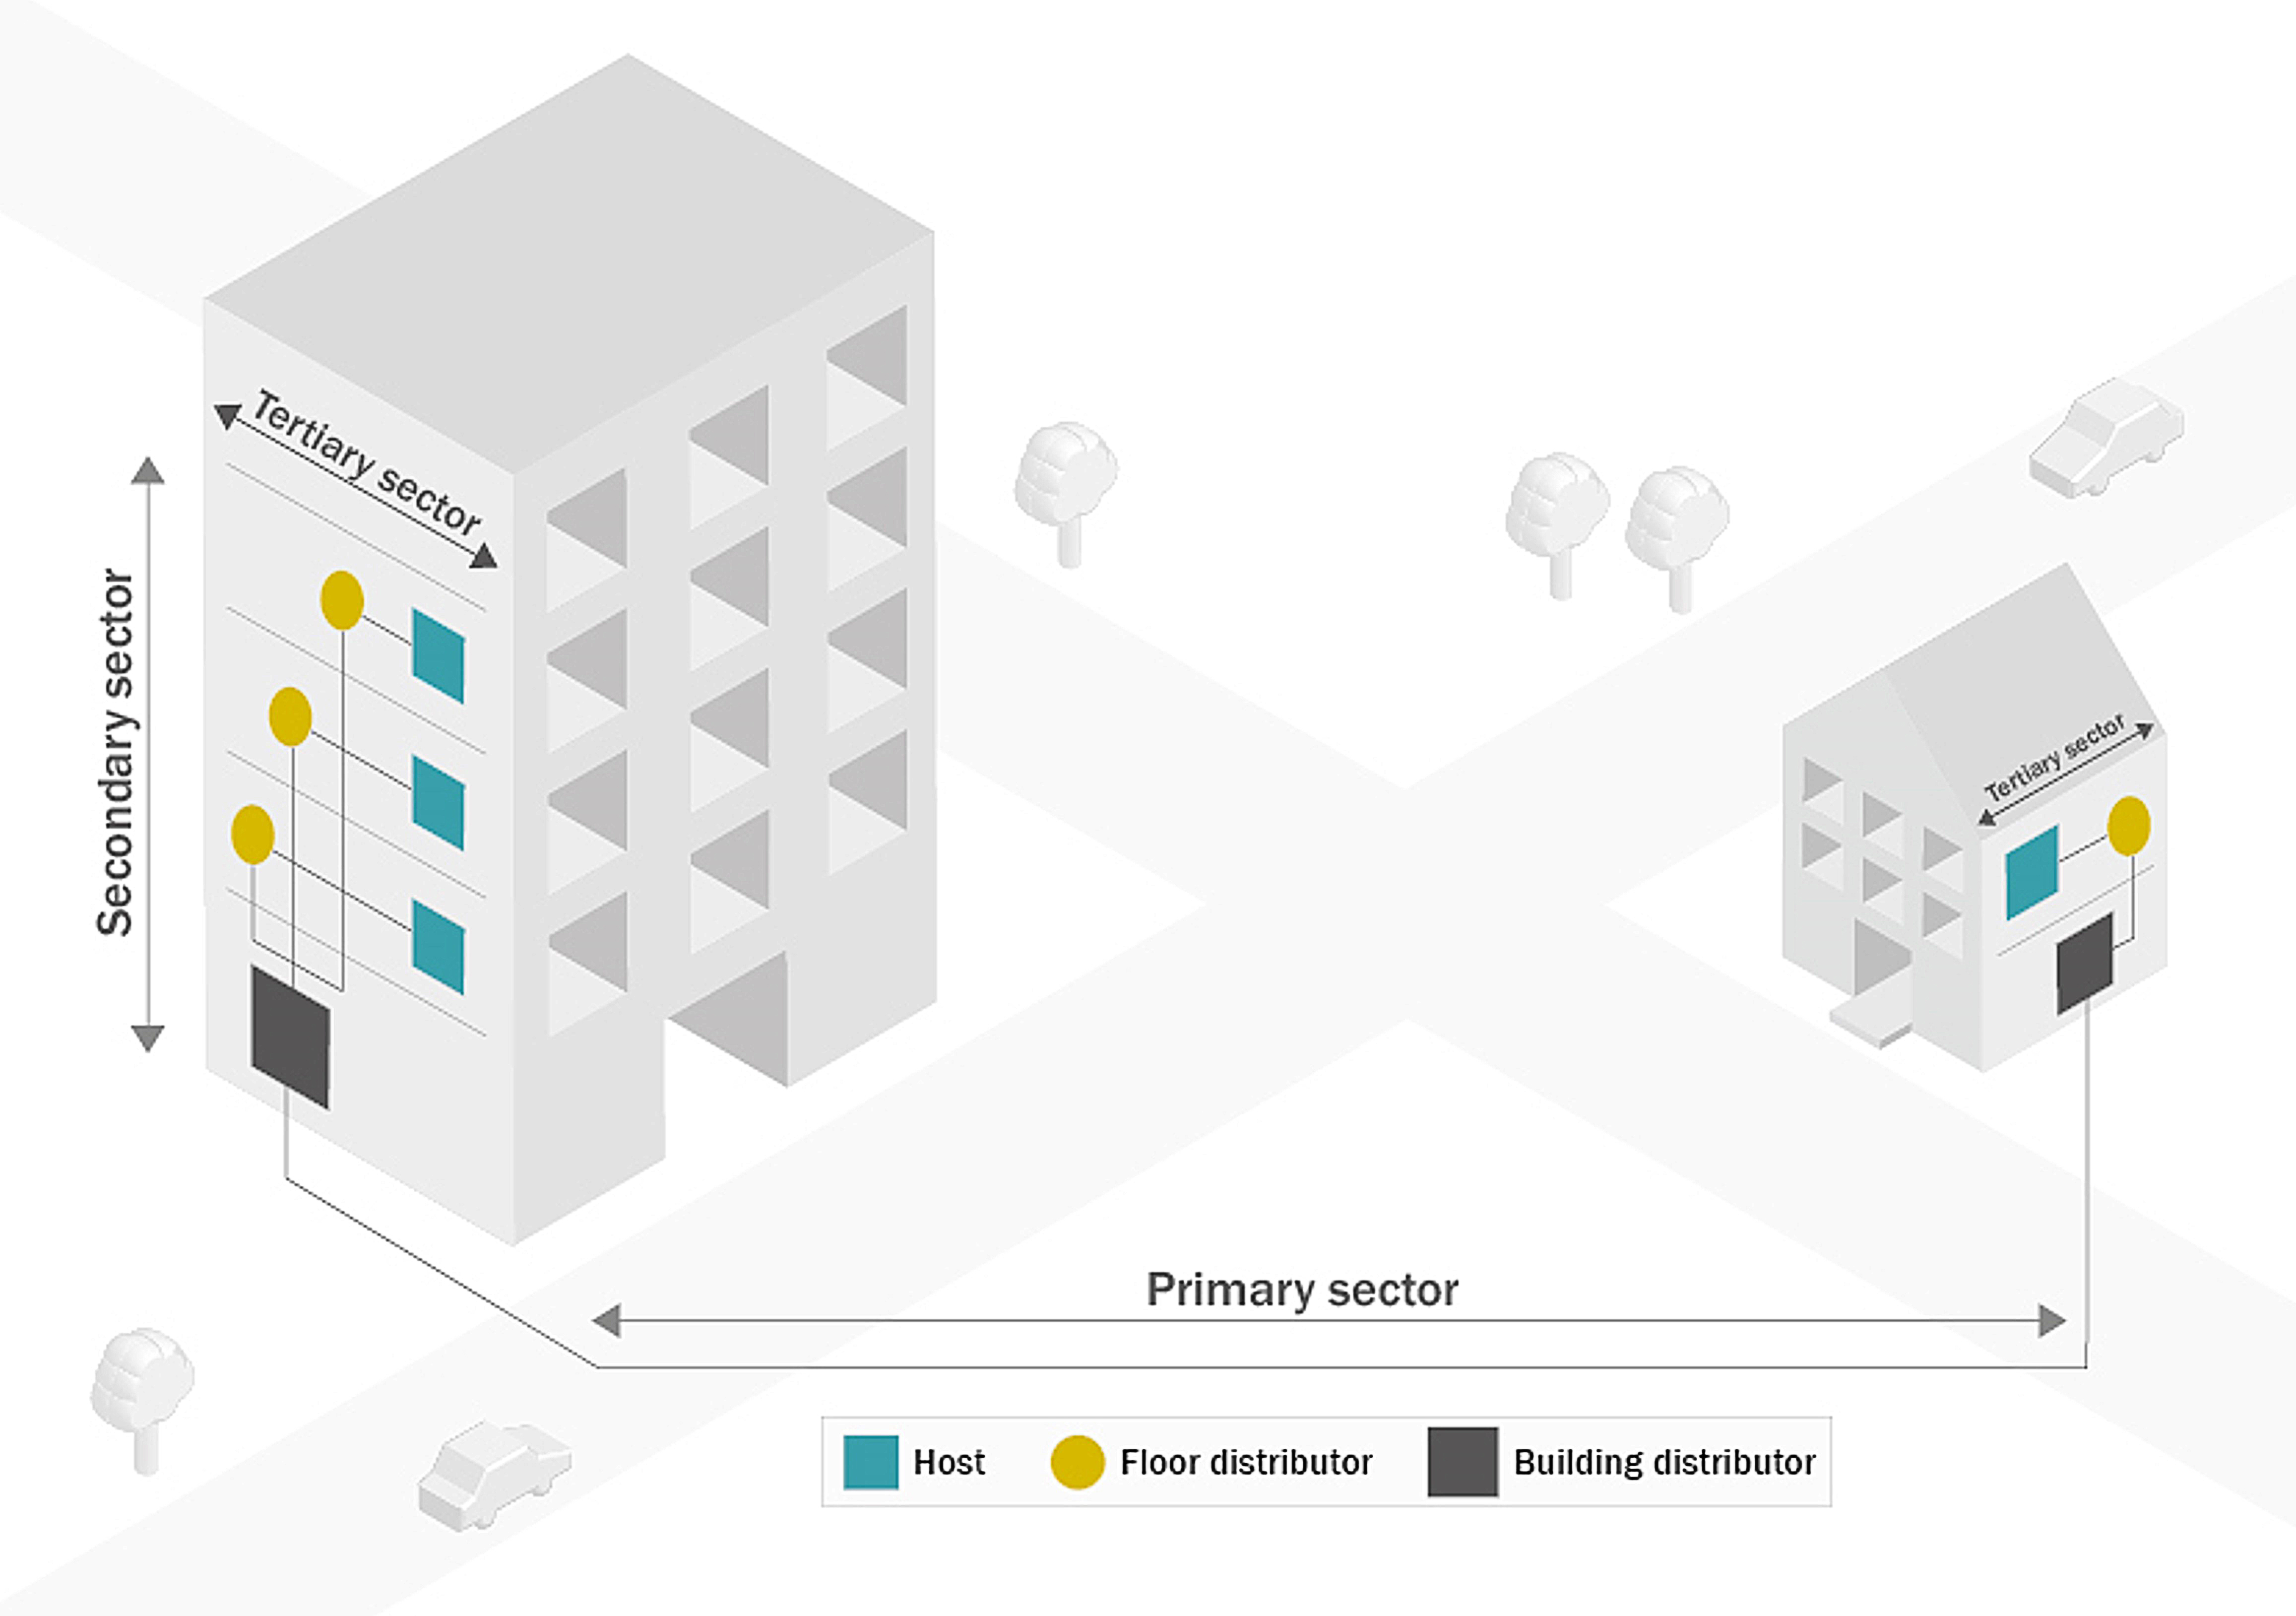 Sketch of the primary, secondary and tertiary sectors